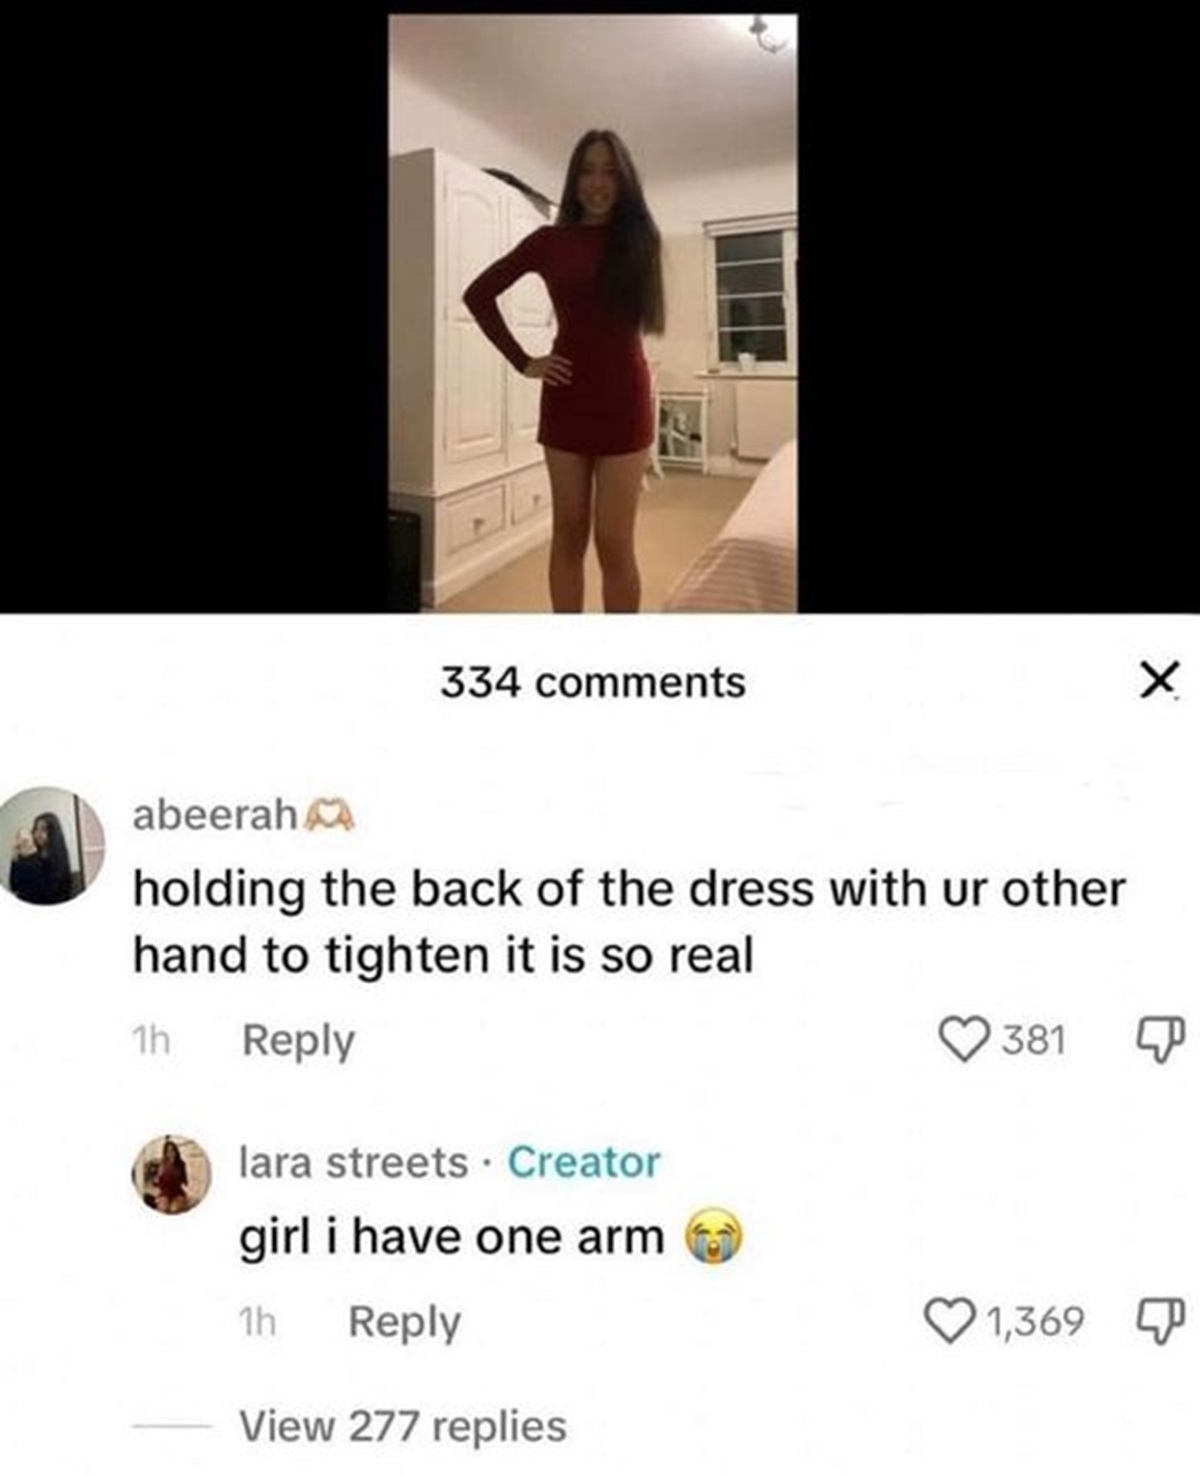 screenshot - 334 abeerah holding the back of the dress with ur other hand to tighten it is so real 1h lara streets. Creator girl i have one arm 1h View 277 replies 381 1,369 X